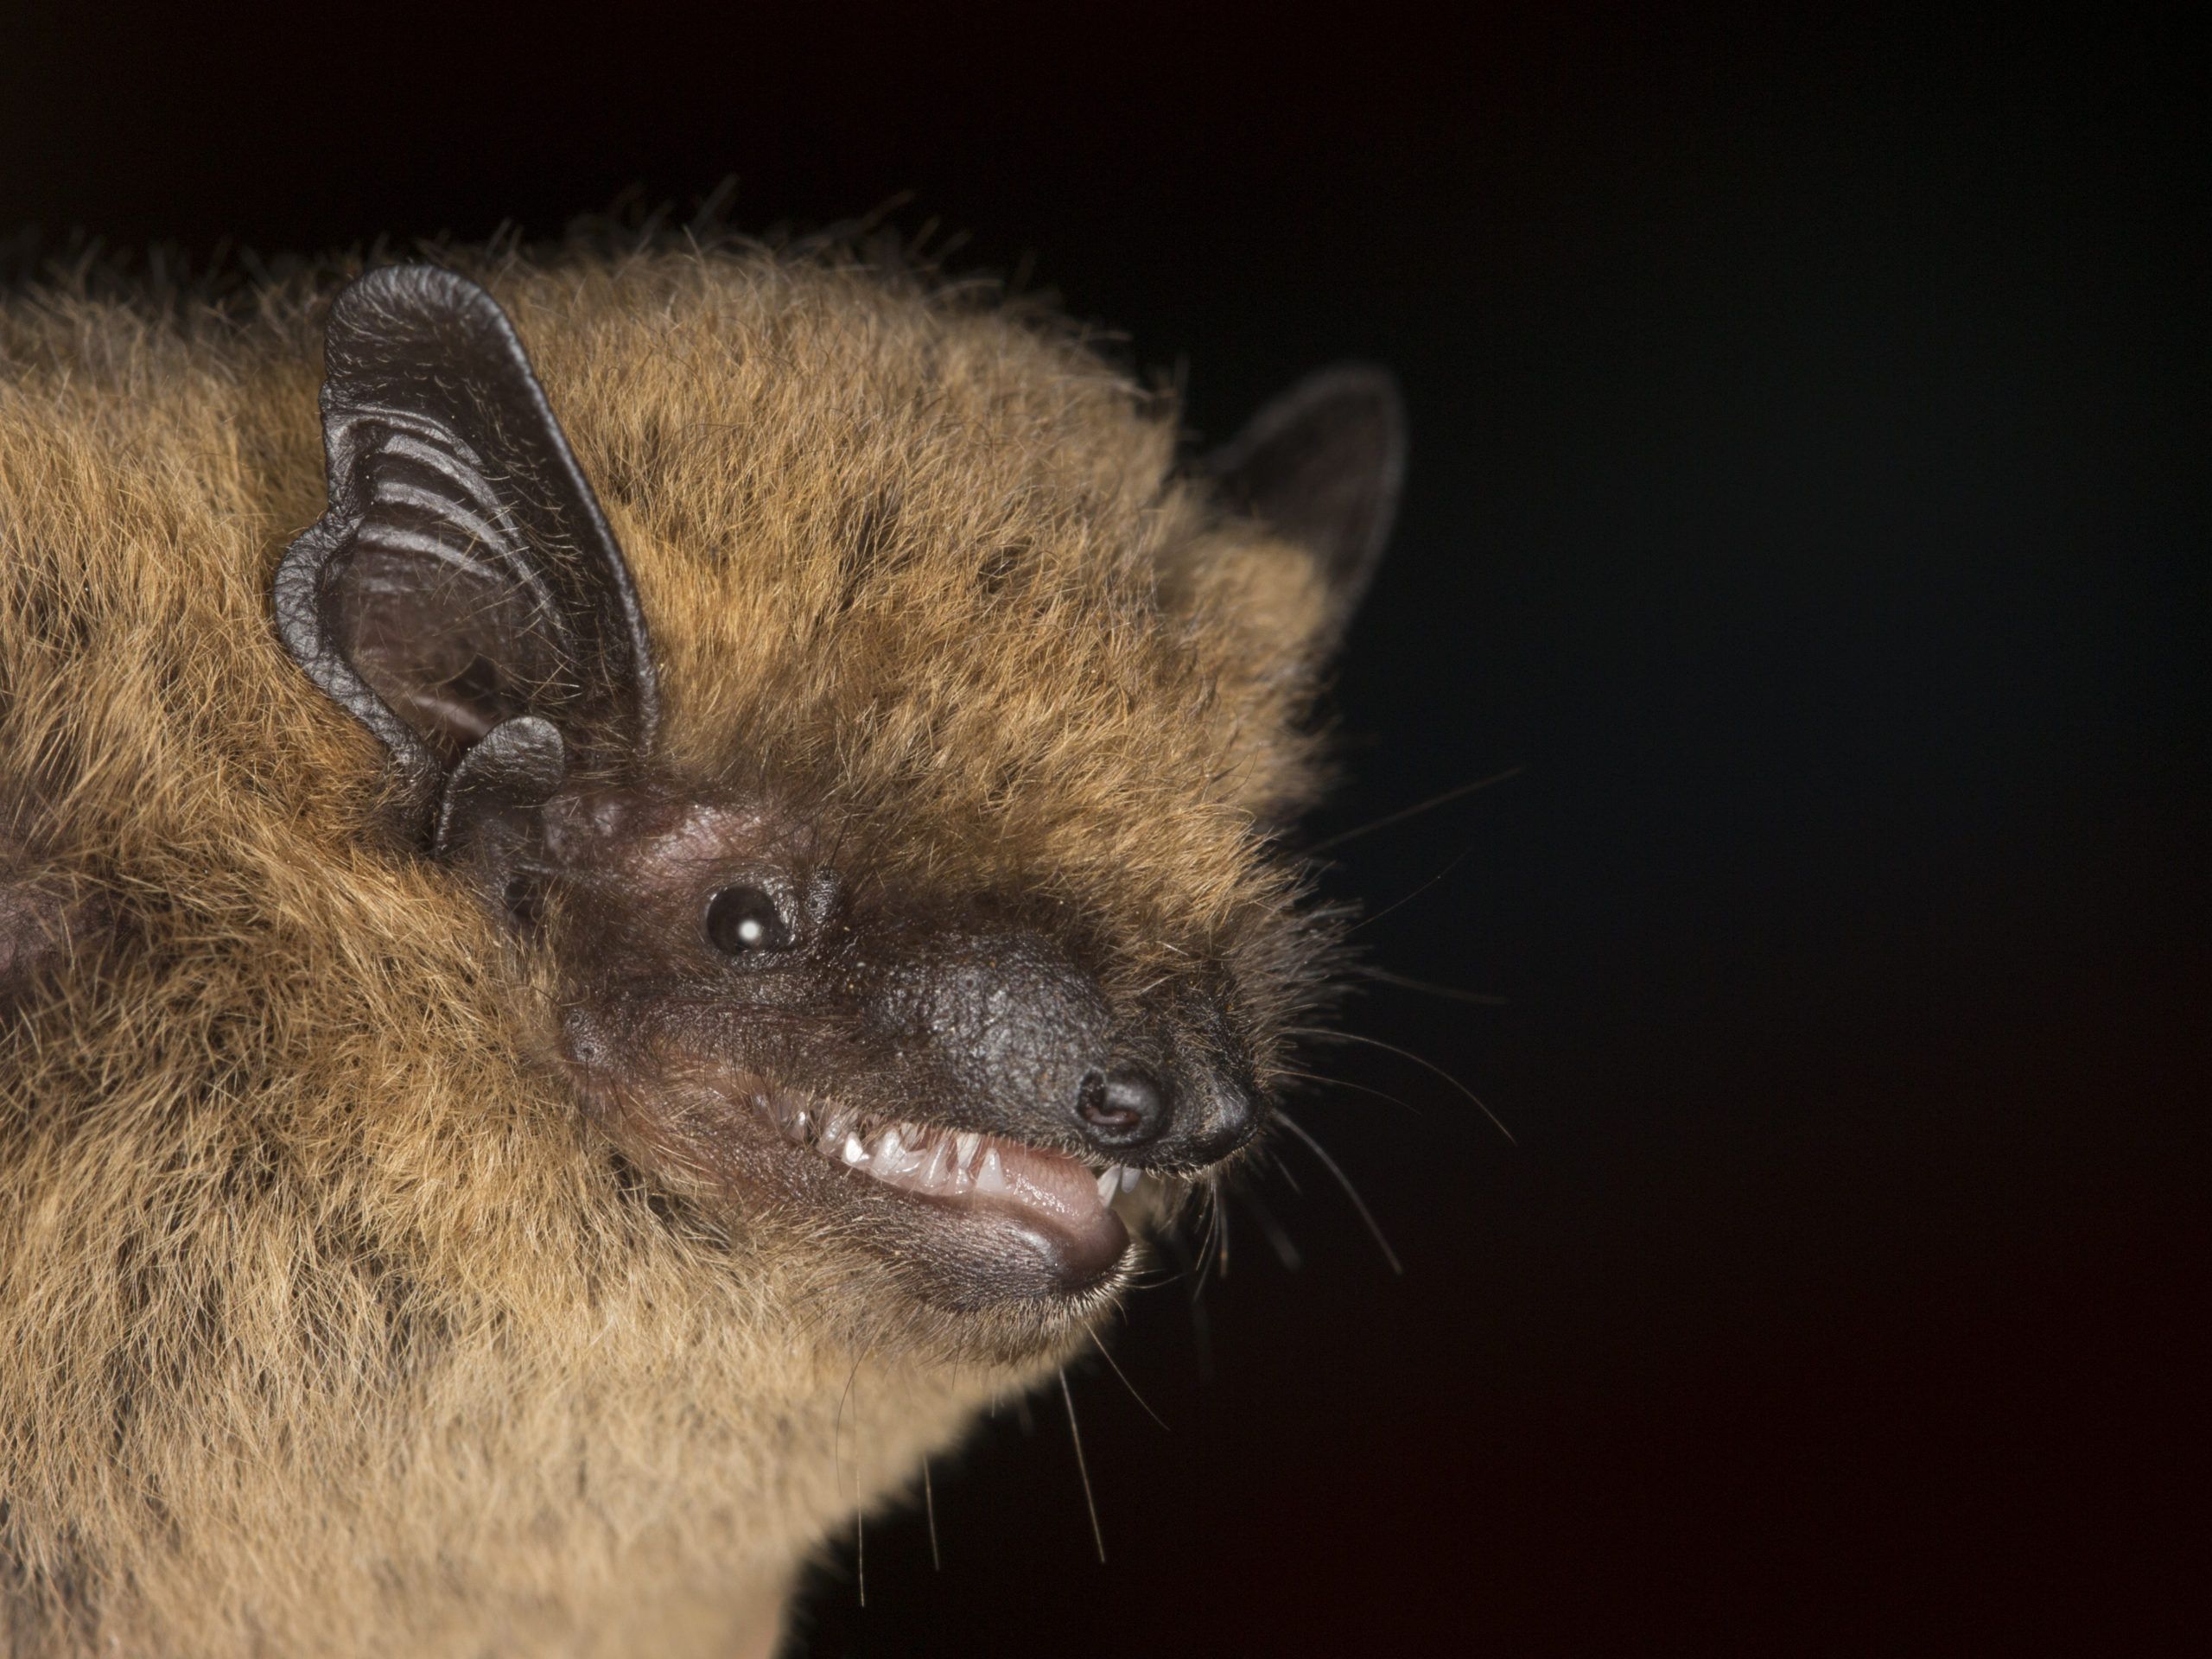 Image of common pipistrelle showing the profile of the bat's face on a black background.